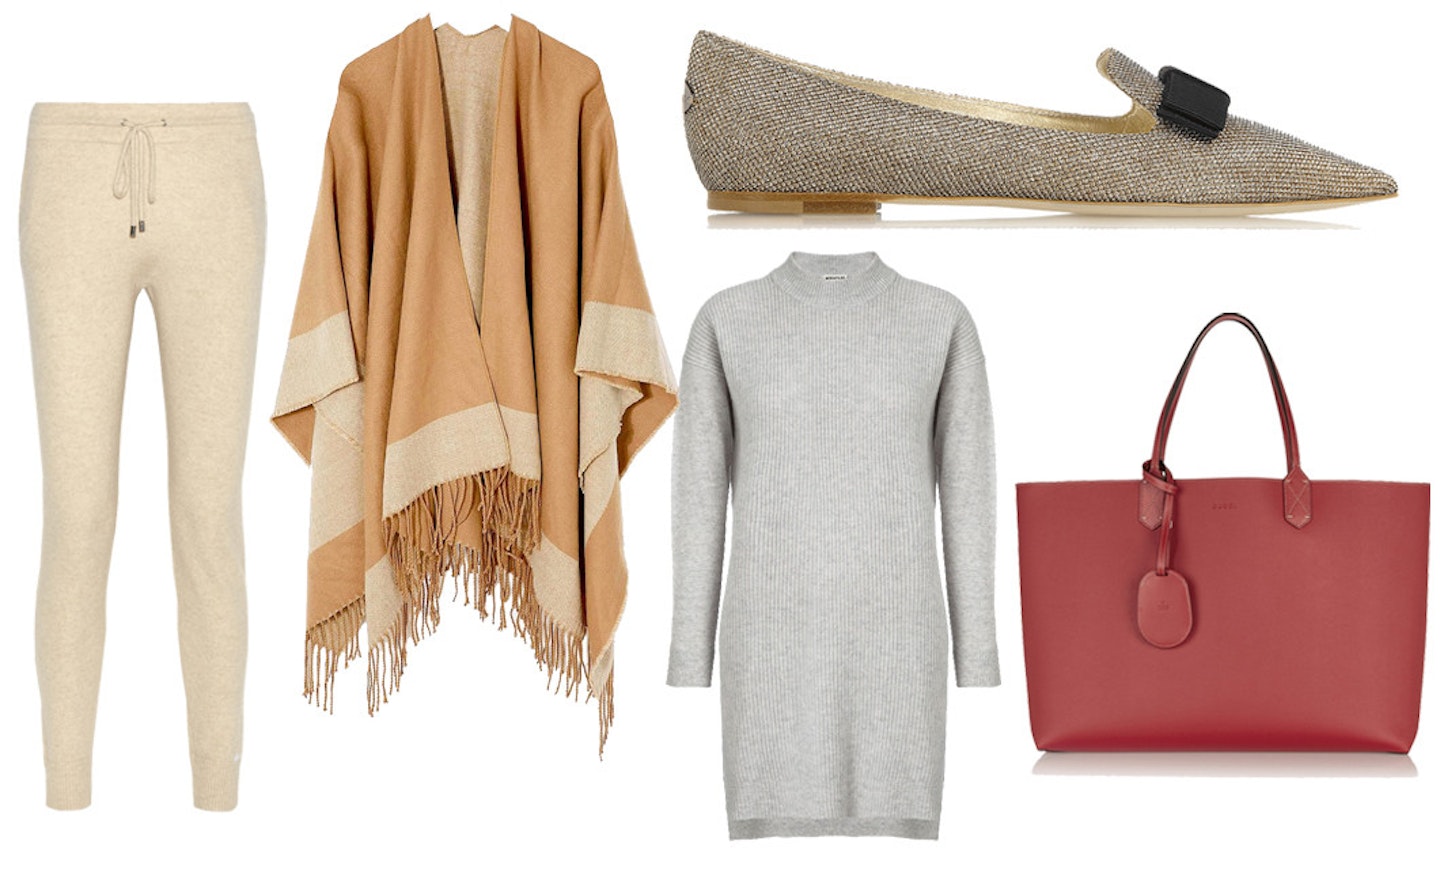 Cashmere Trousers £280 by Banjo & Matilda    Cape £25 by Asos    Whistles £95    Pointed Shoes £375 by Jimmy Choo    Red tote by £785 by Gucci